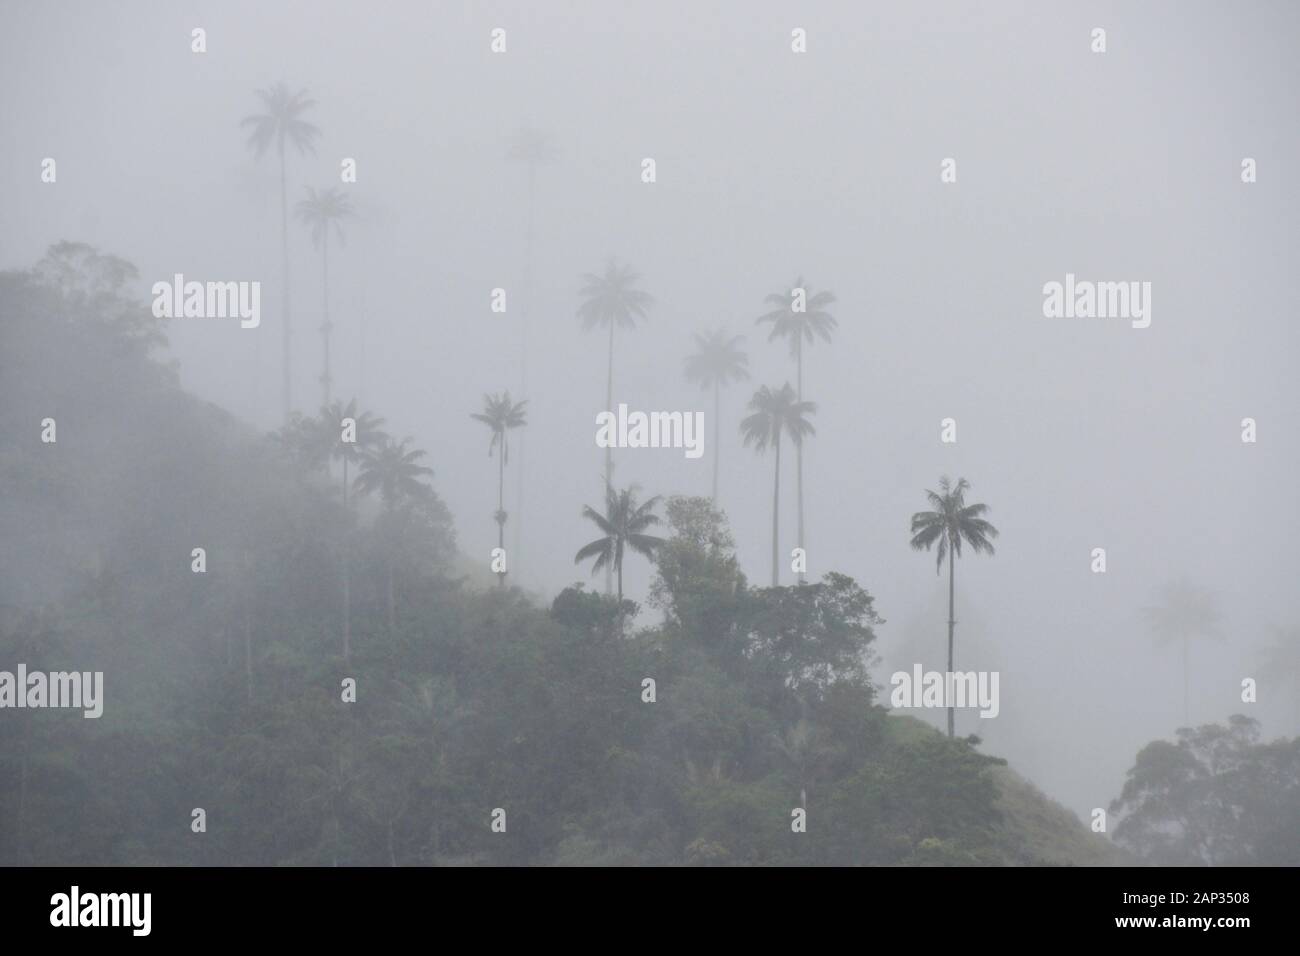 Wax palms (Colombia's national tree) and tropical vegetation in the Cocora Valley near Salento, Quindio Department, Colombia, on a misty and rainy day Stock Photo